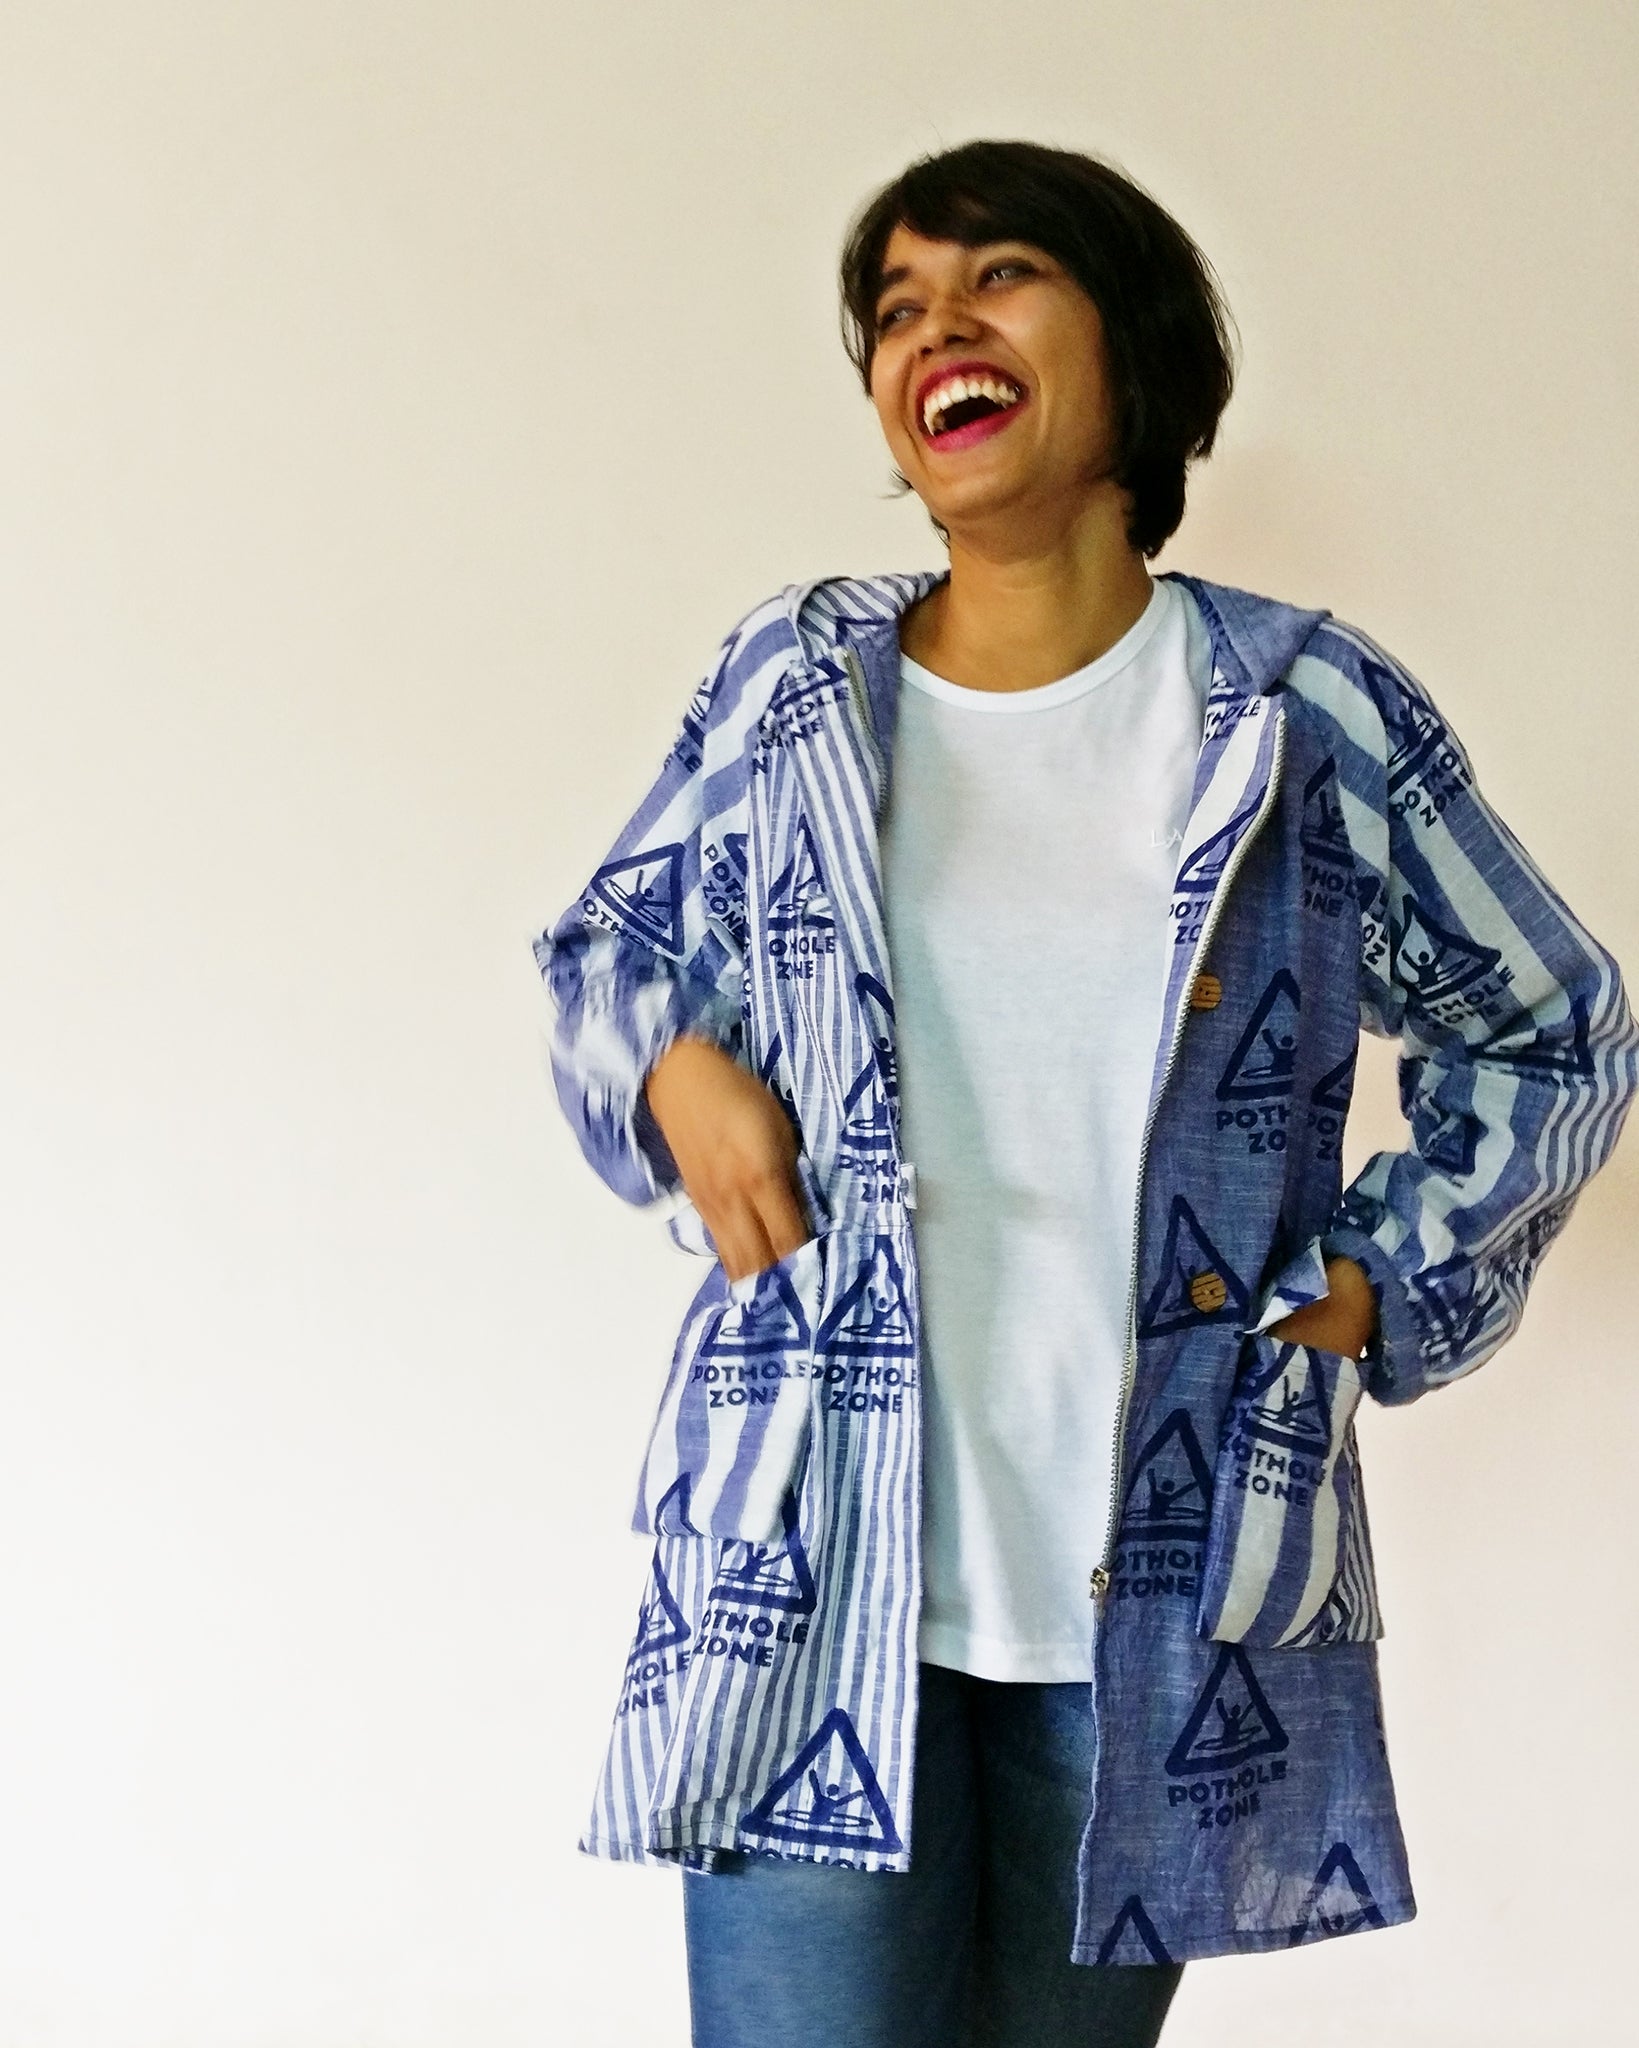 Wear your love for Bombay Meri Jaan. Women's parka with our original print Pothole Zone on very cool handloom stripe cotton fabric. Shop online and survive the monsoon!